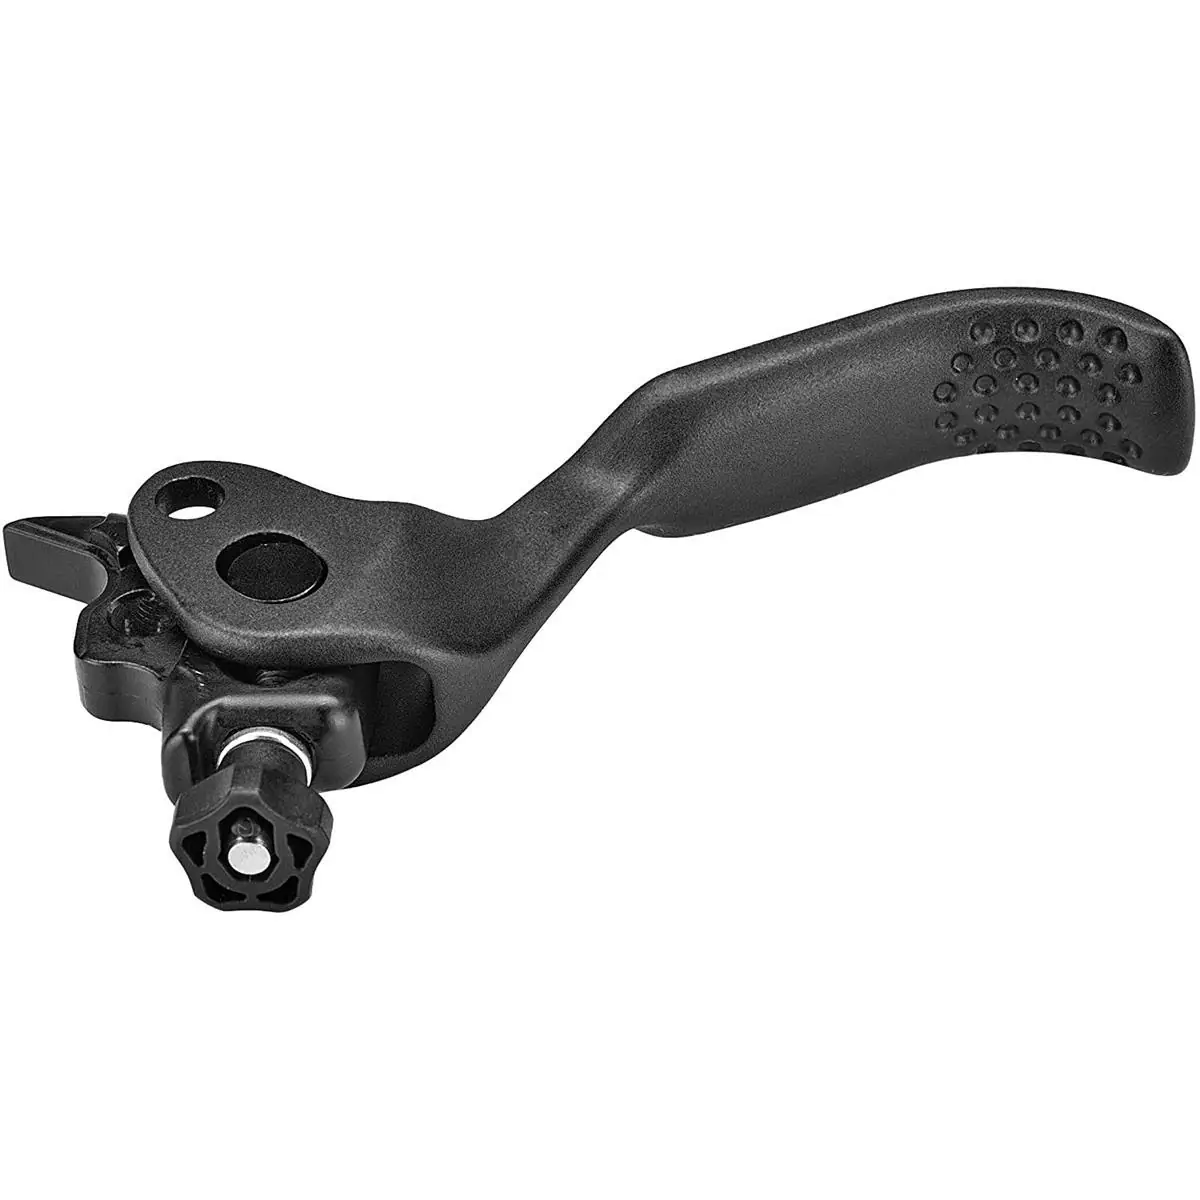 Replacement brake lever left / right XTR BL-M9120 - image